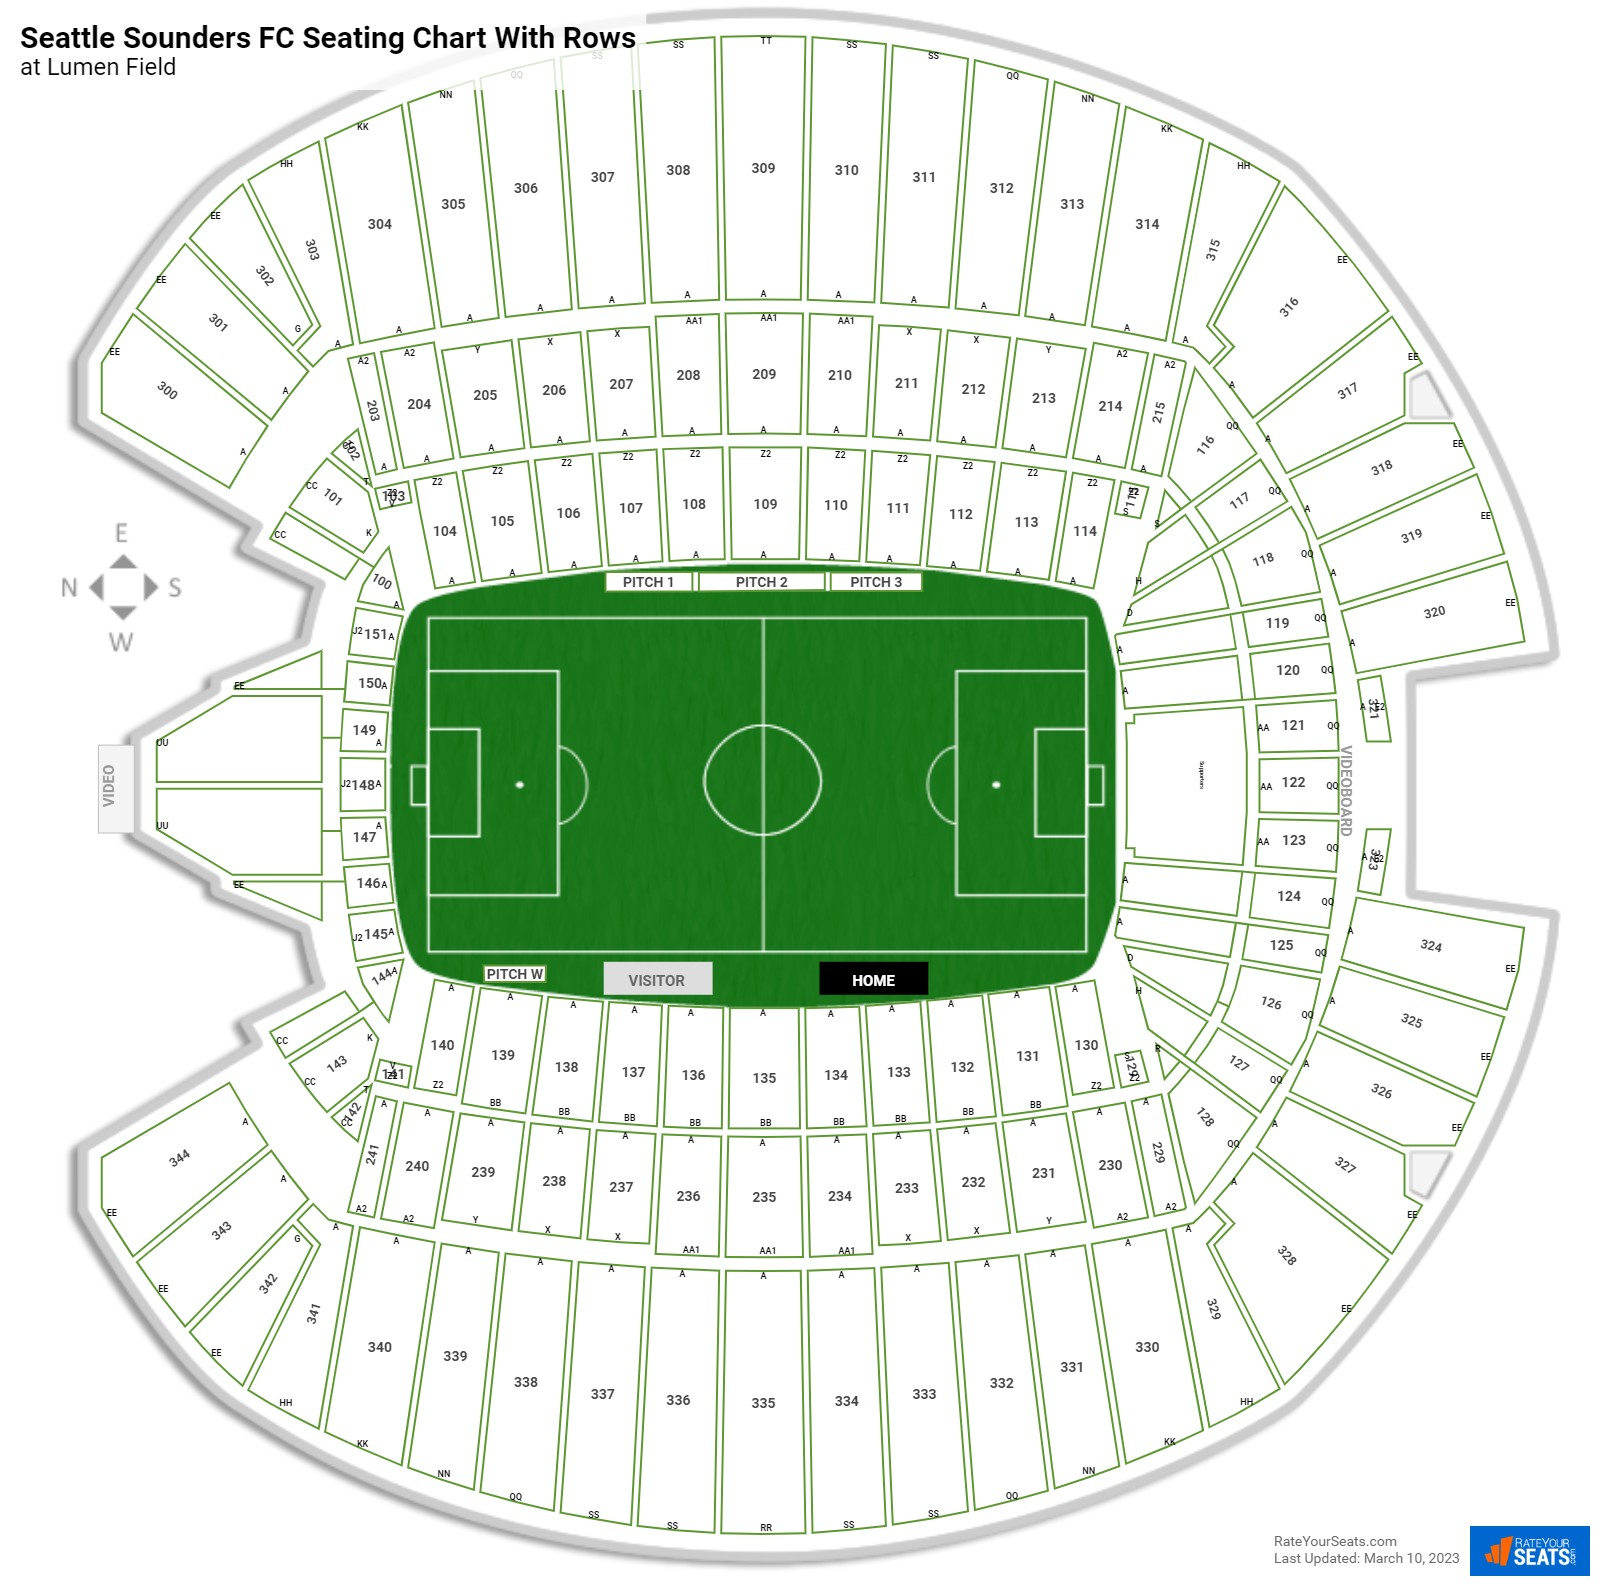 Seattle Sounders FC Seating Charts at CenturyLink Field